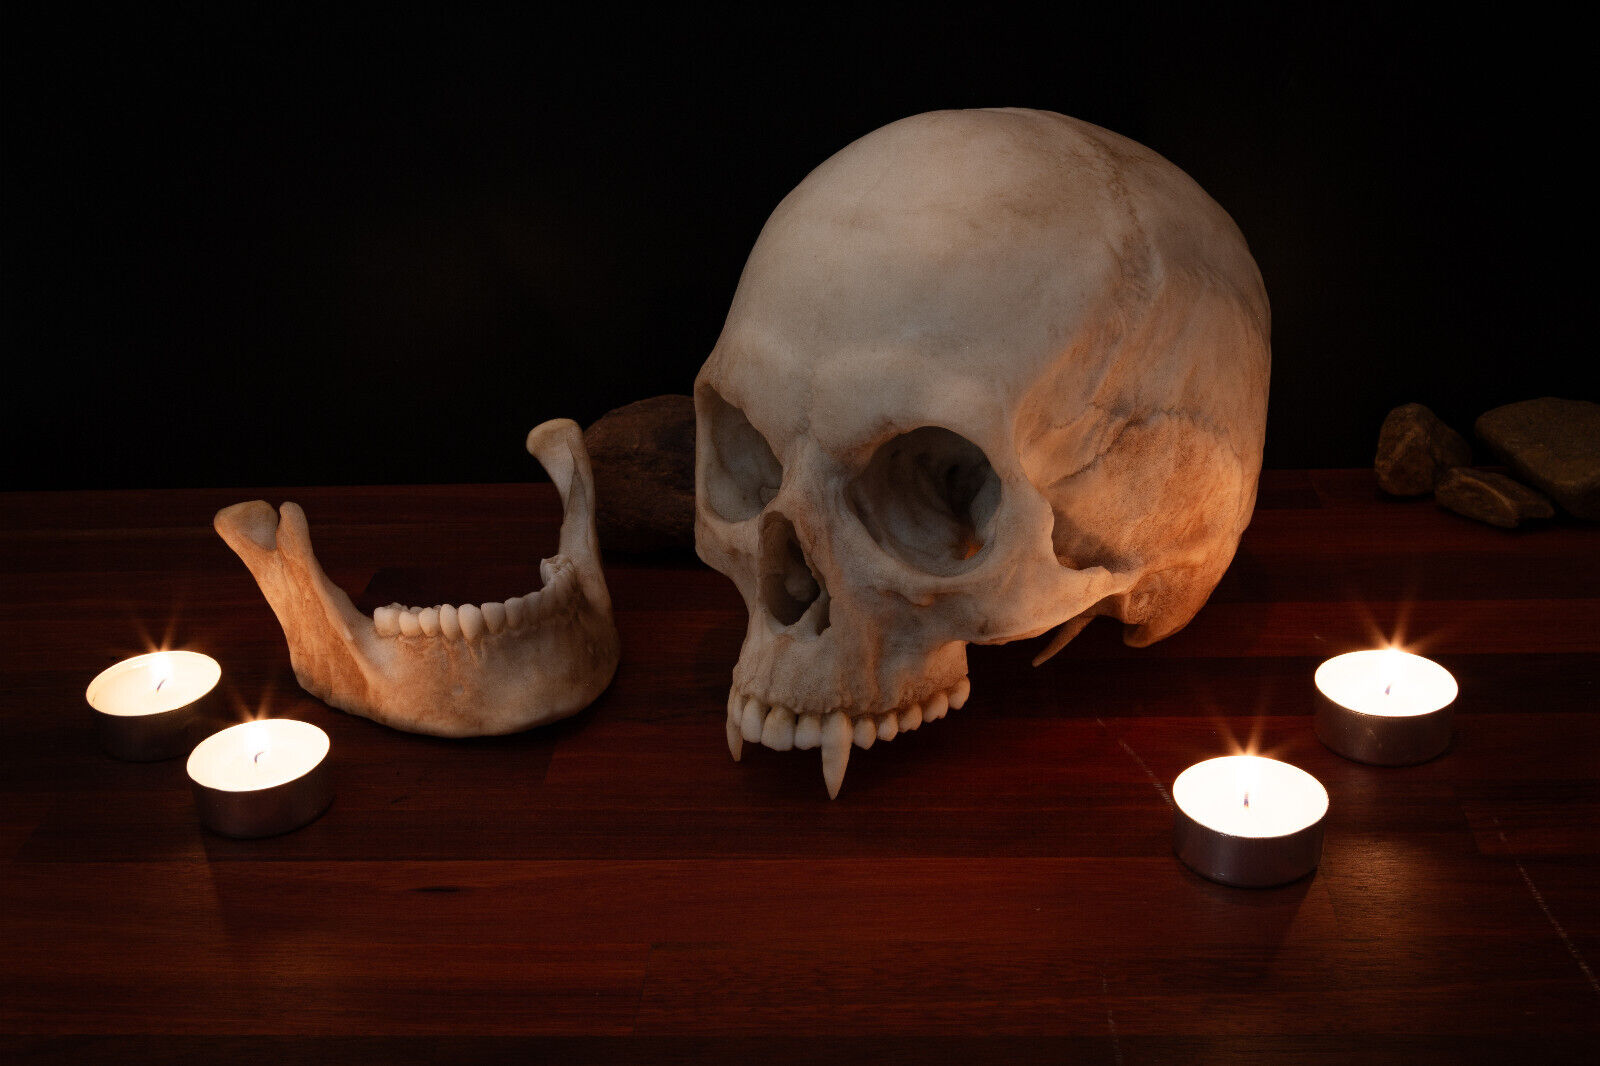 Vampire Skull - life sized - super detailed - Resin Printed High Quality Piece.